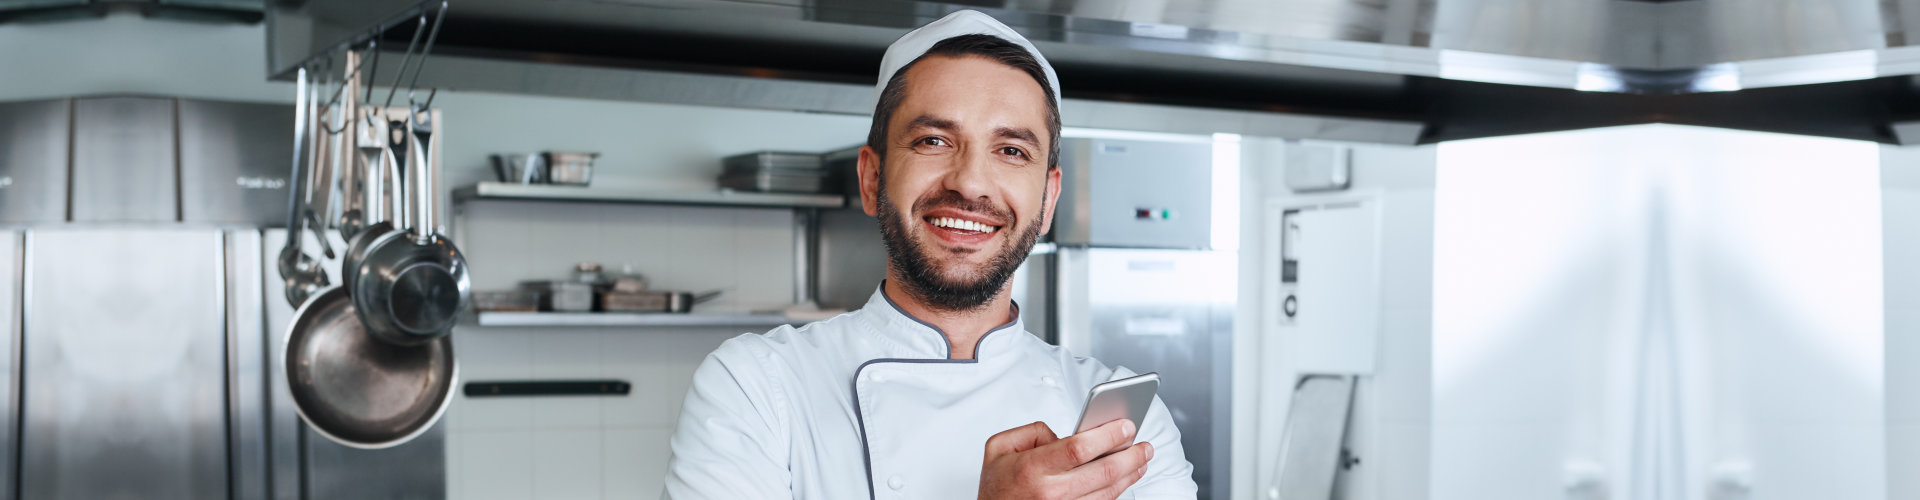 Happy cook standing in a kitchen while holding phone